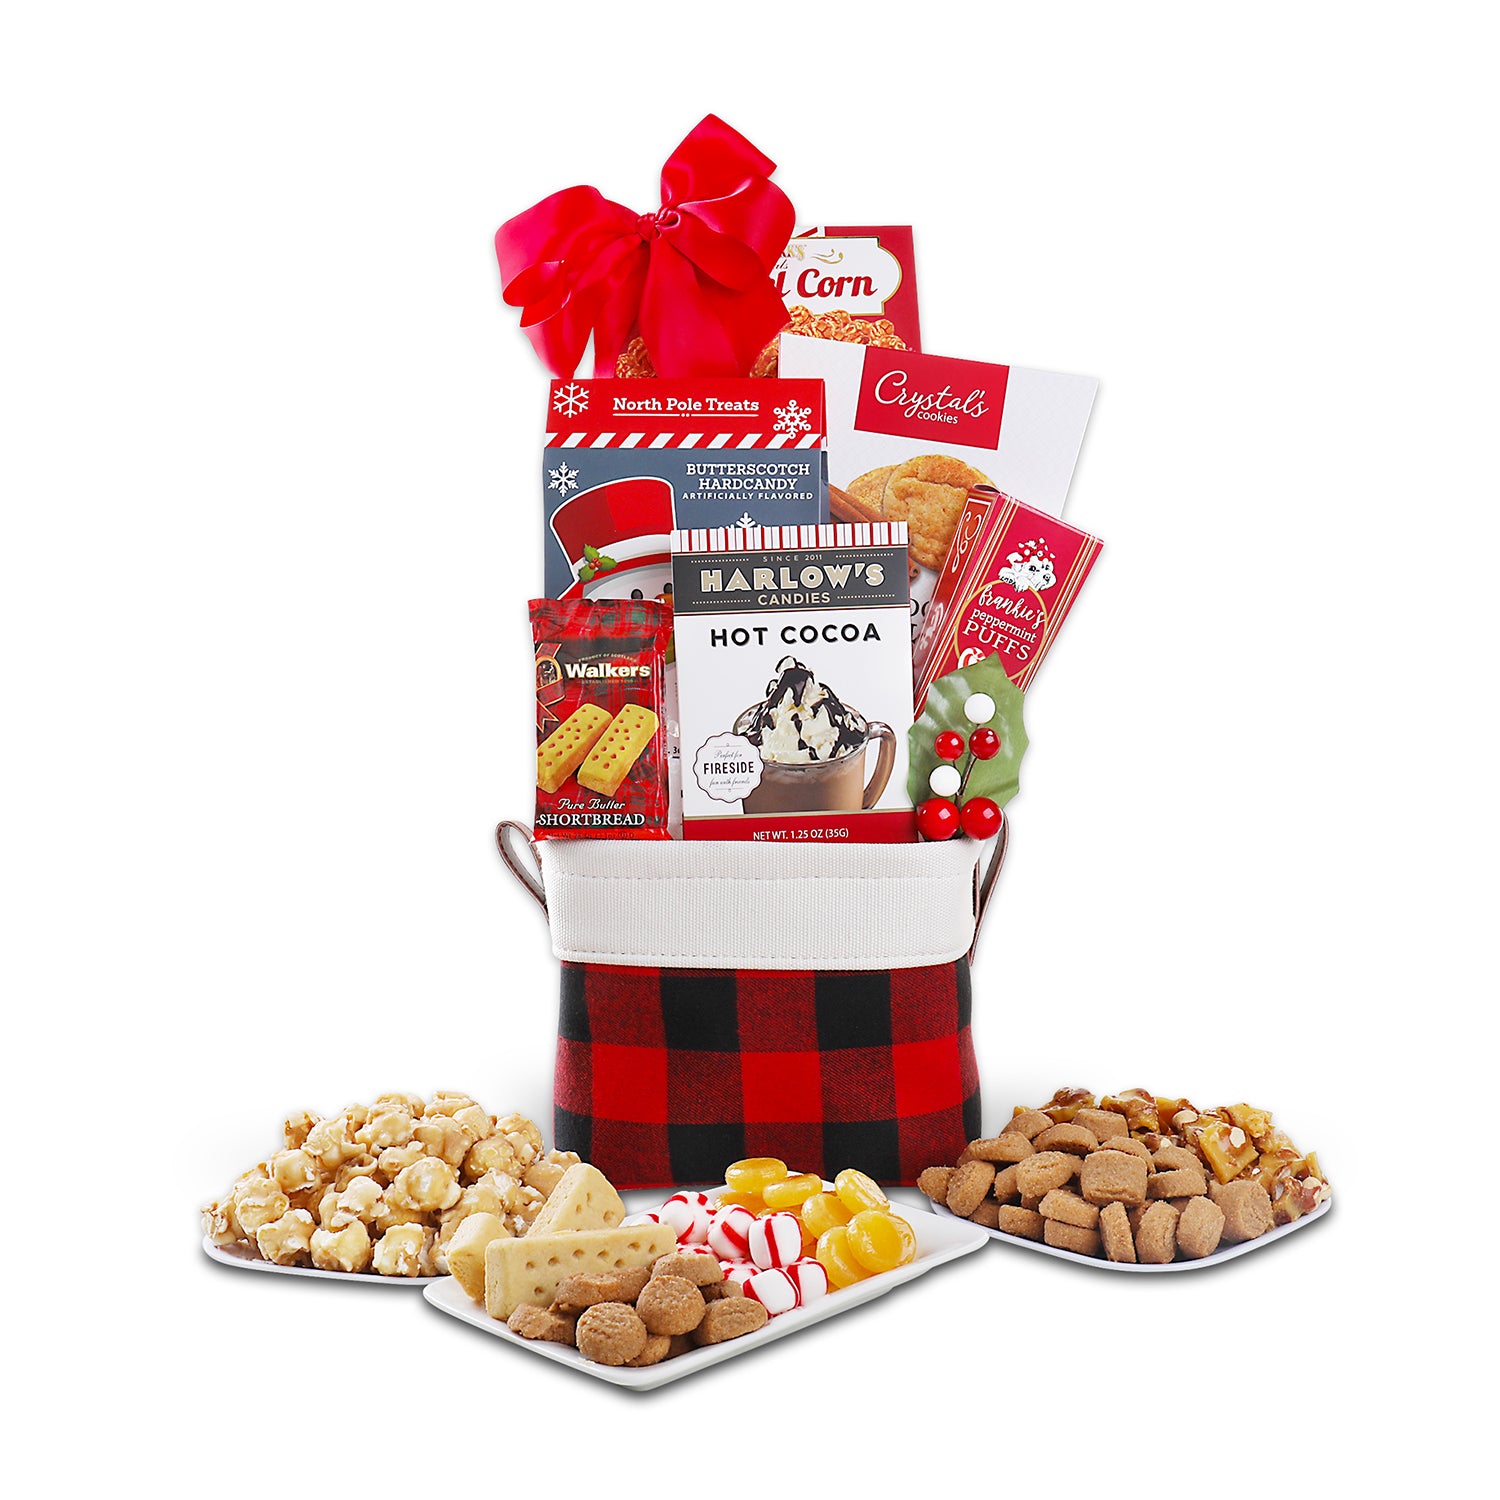 Gift with contents Red & Black Plaid Fabric Tote, Caramel Corn (3oz), Crystal's Snickerdoodle Cookies (2.5oz), Snowman Butterscotch Candy (3oz), Frankie's Peppermint Puffs (1.2oz), Harlow's Hot Cocoa, Walkers Shortbread Fingers (1.0oz) displayed on plates